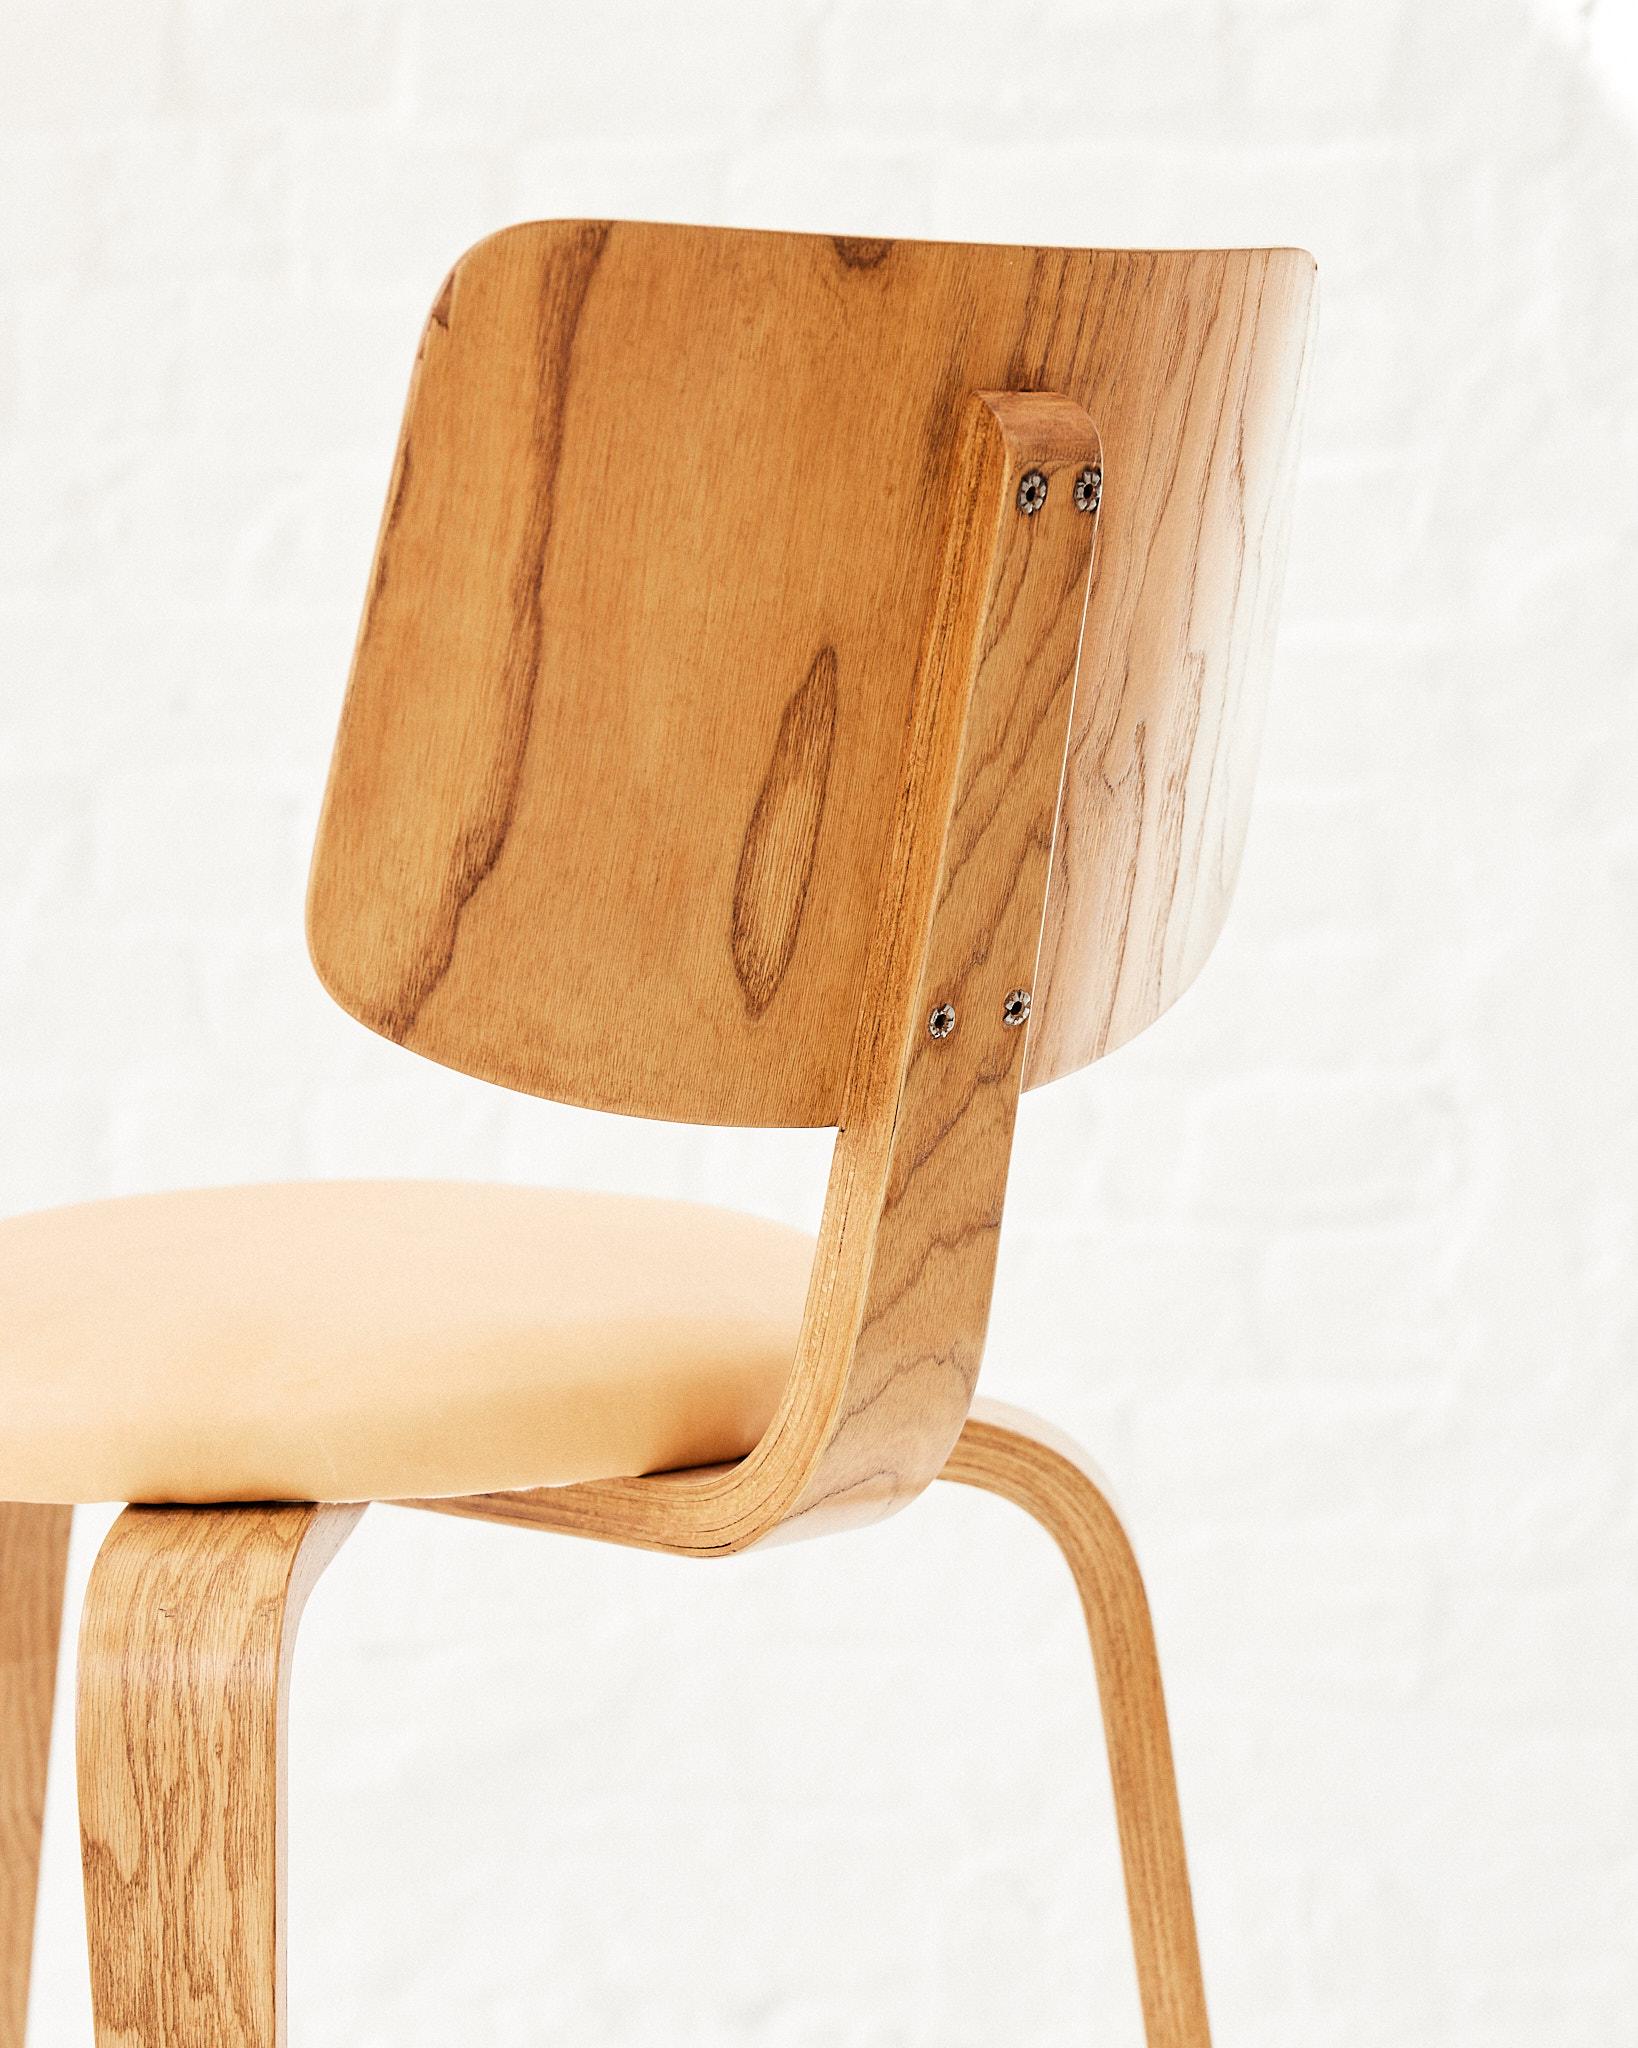 PIERRE PAULIN Plywood Tripod Chair In Excellent Condition For Sale In Forest, BE